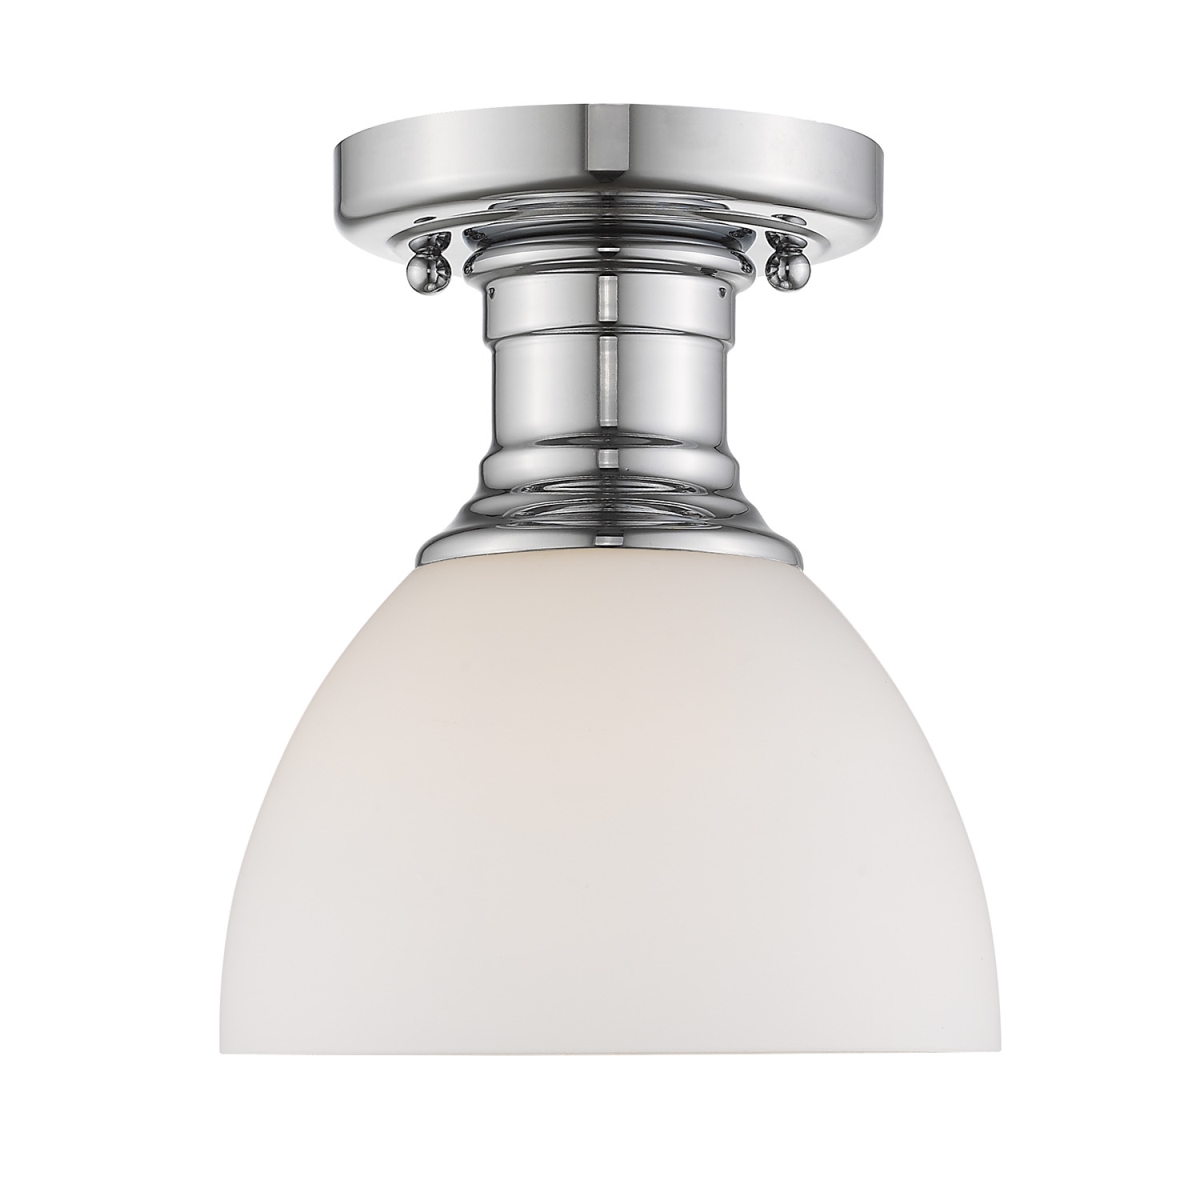 3118-sf Ch-op Hines Semi-flush Mount Light With Opal Glass, Chrome